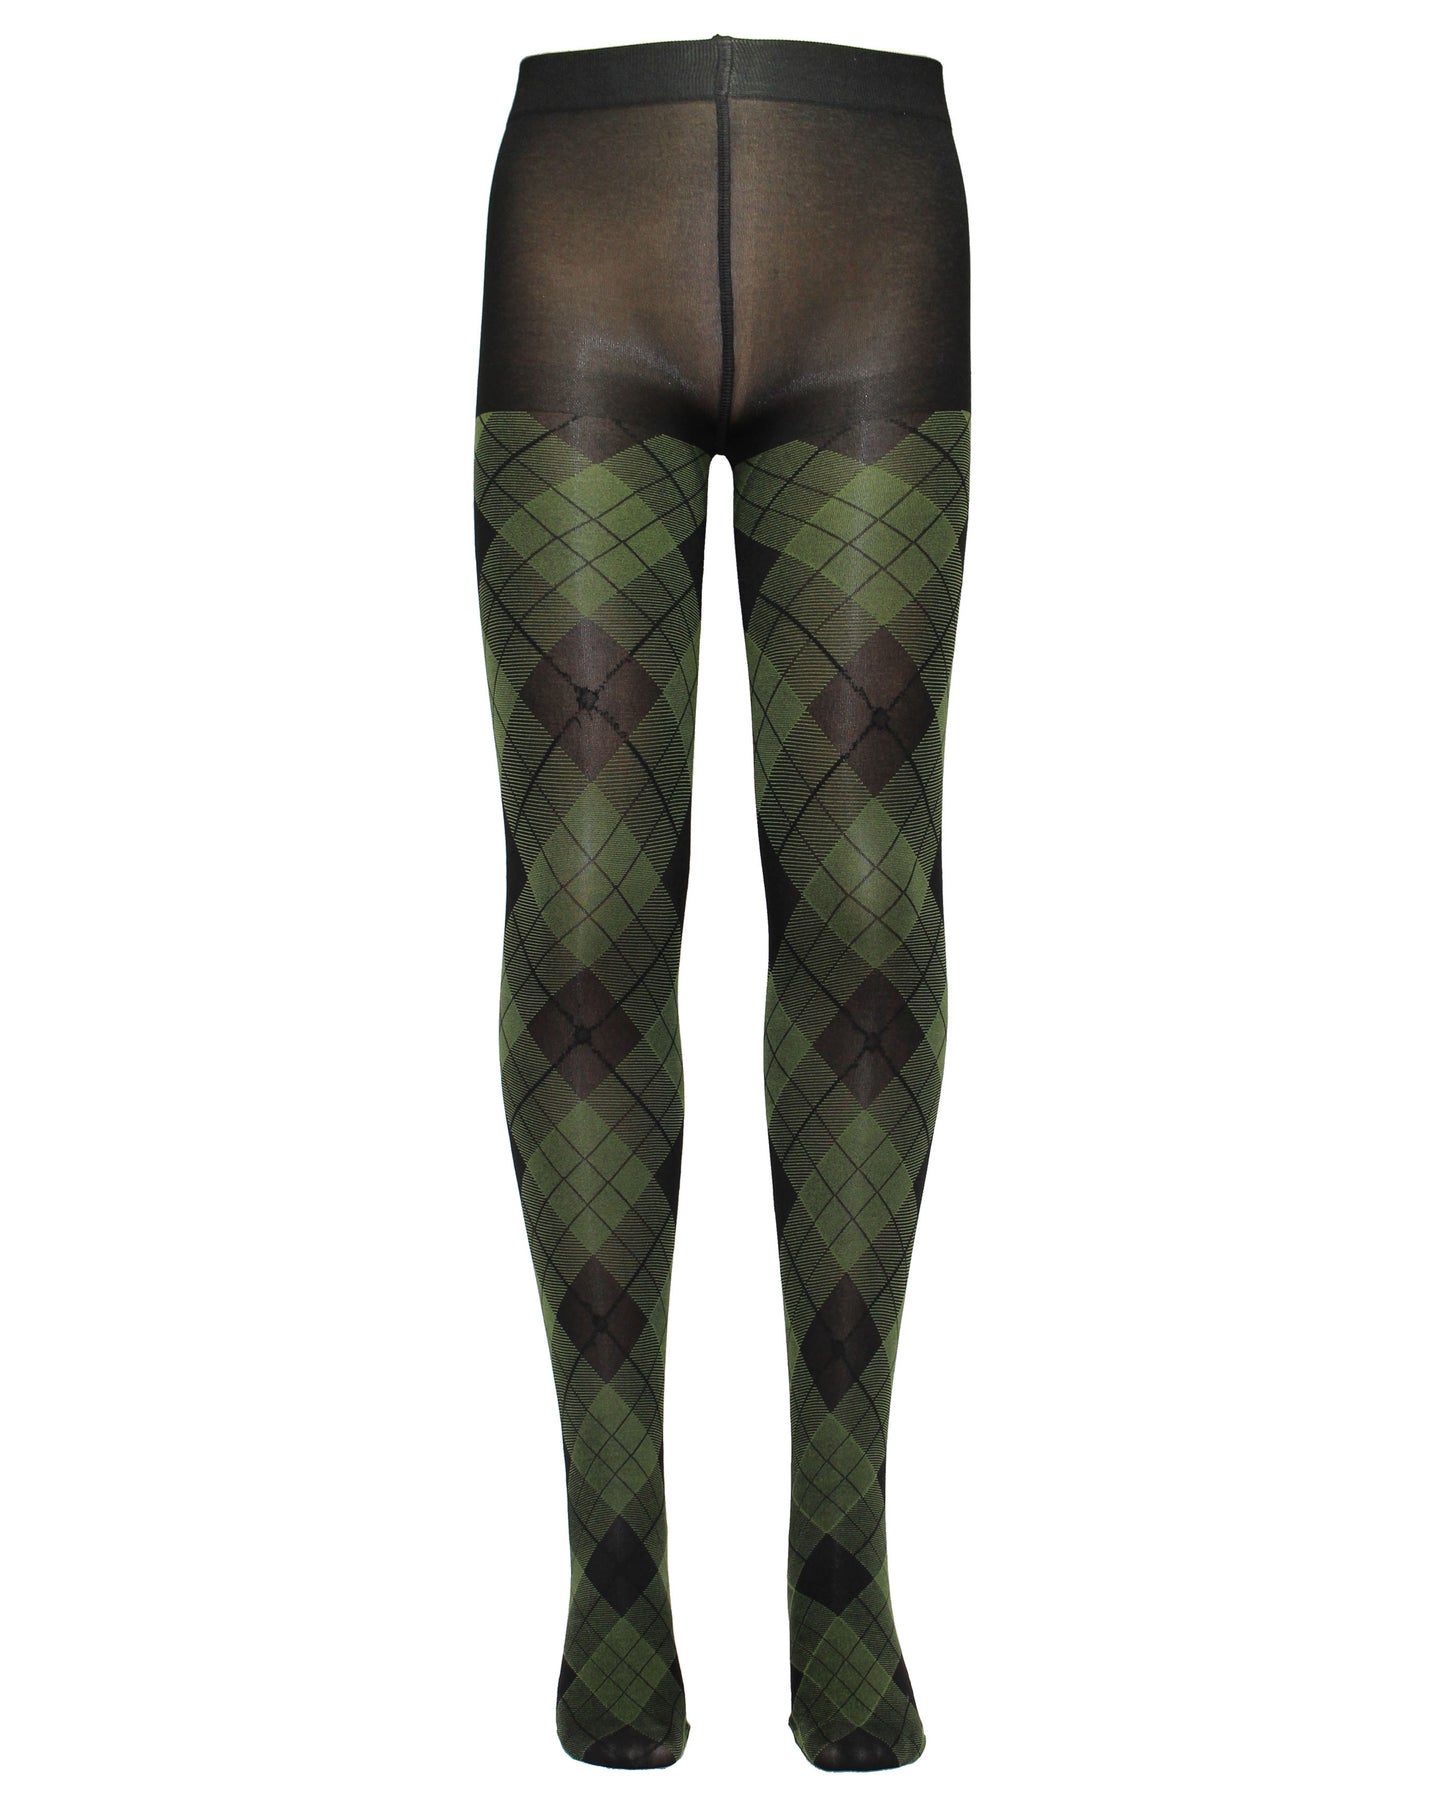 Omsa Serenella Shire Collant - Black opaque children's fashion tights with an olive green tartan / argyle style pattern.